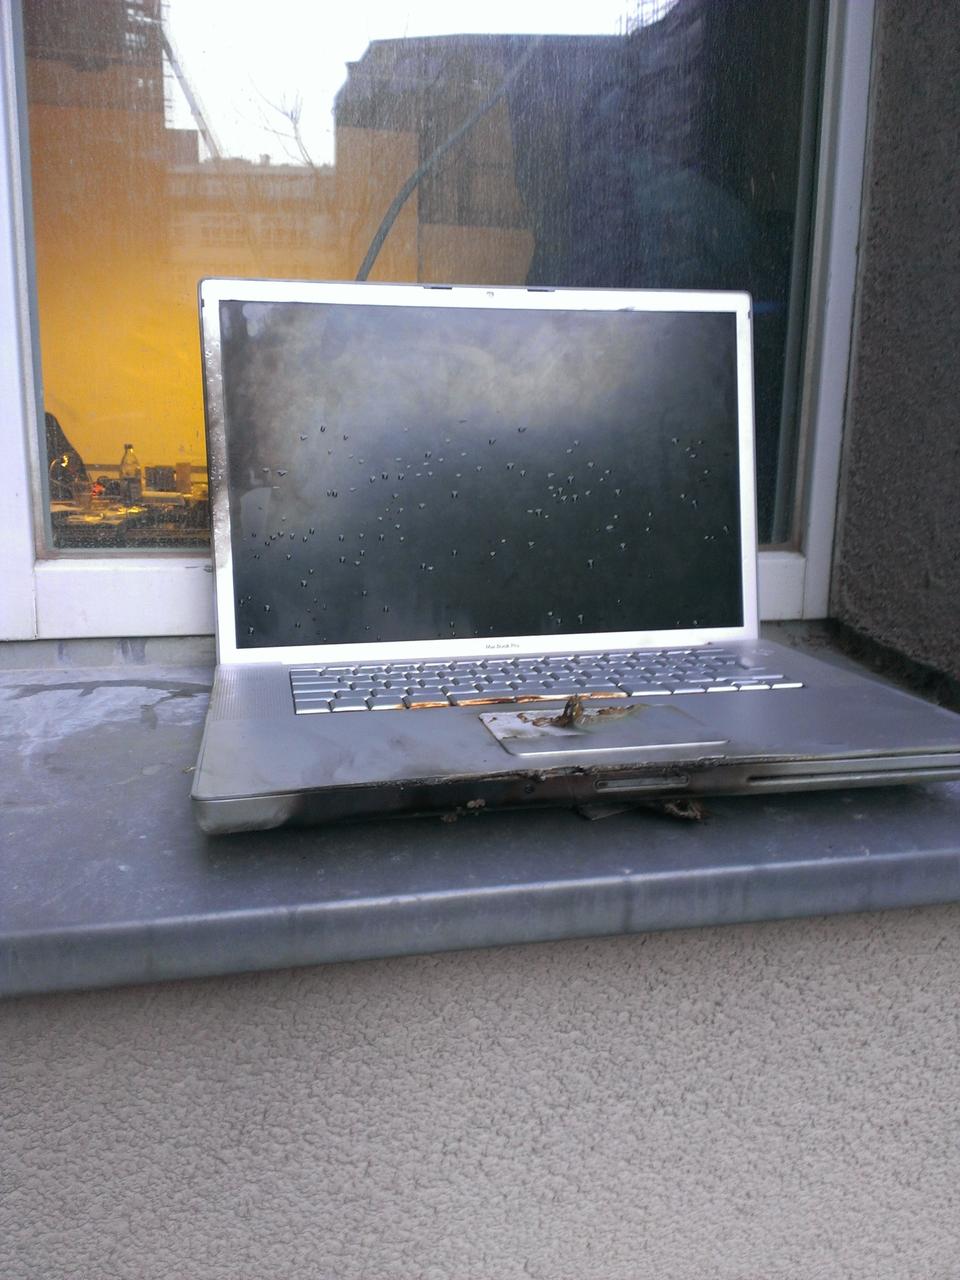 A burnt up MacBook after its Lithium battery got too hot.